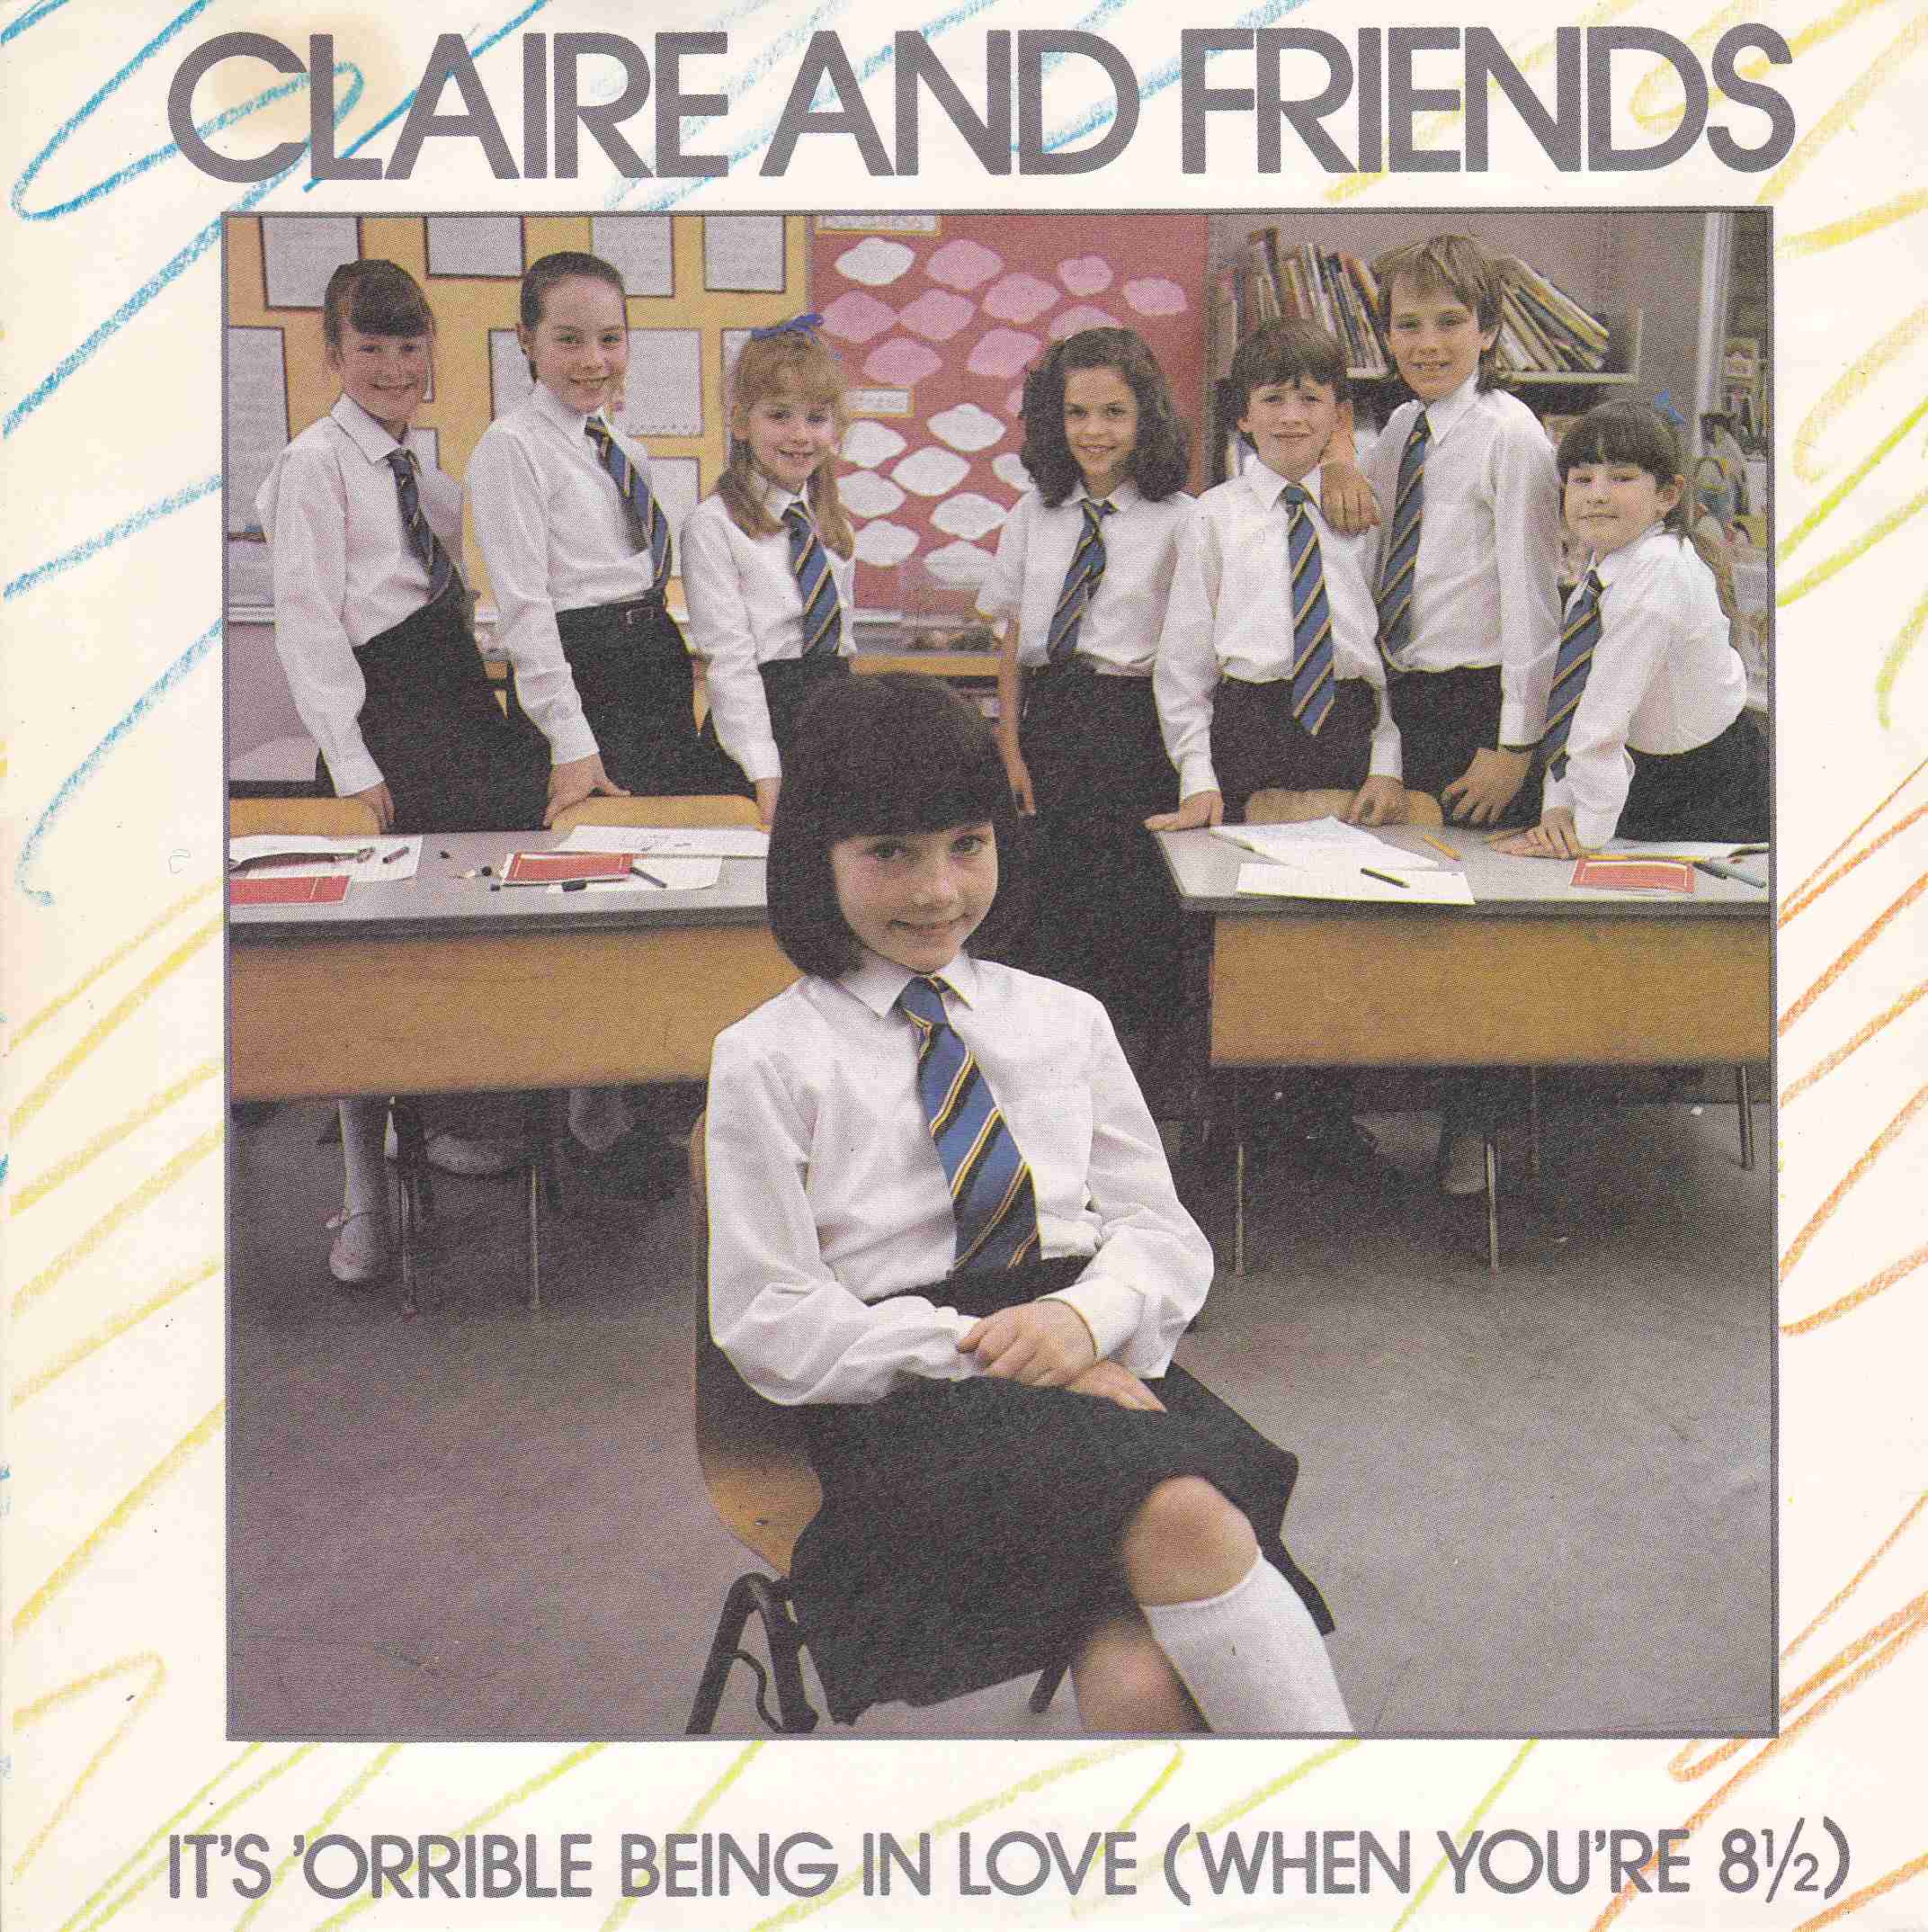 Picture of It's 'orrible being in love (when you're 8 1/2) by artist Mick Coleman / Kevin Parrott / Claire and Friends (Claire Usher) from the BBC singles - Records and Tapes library